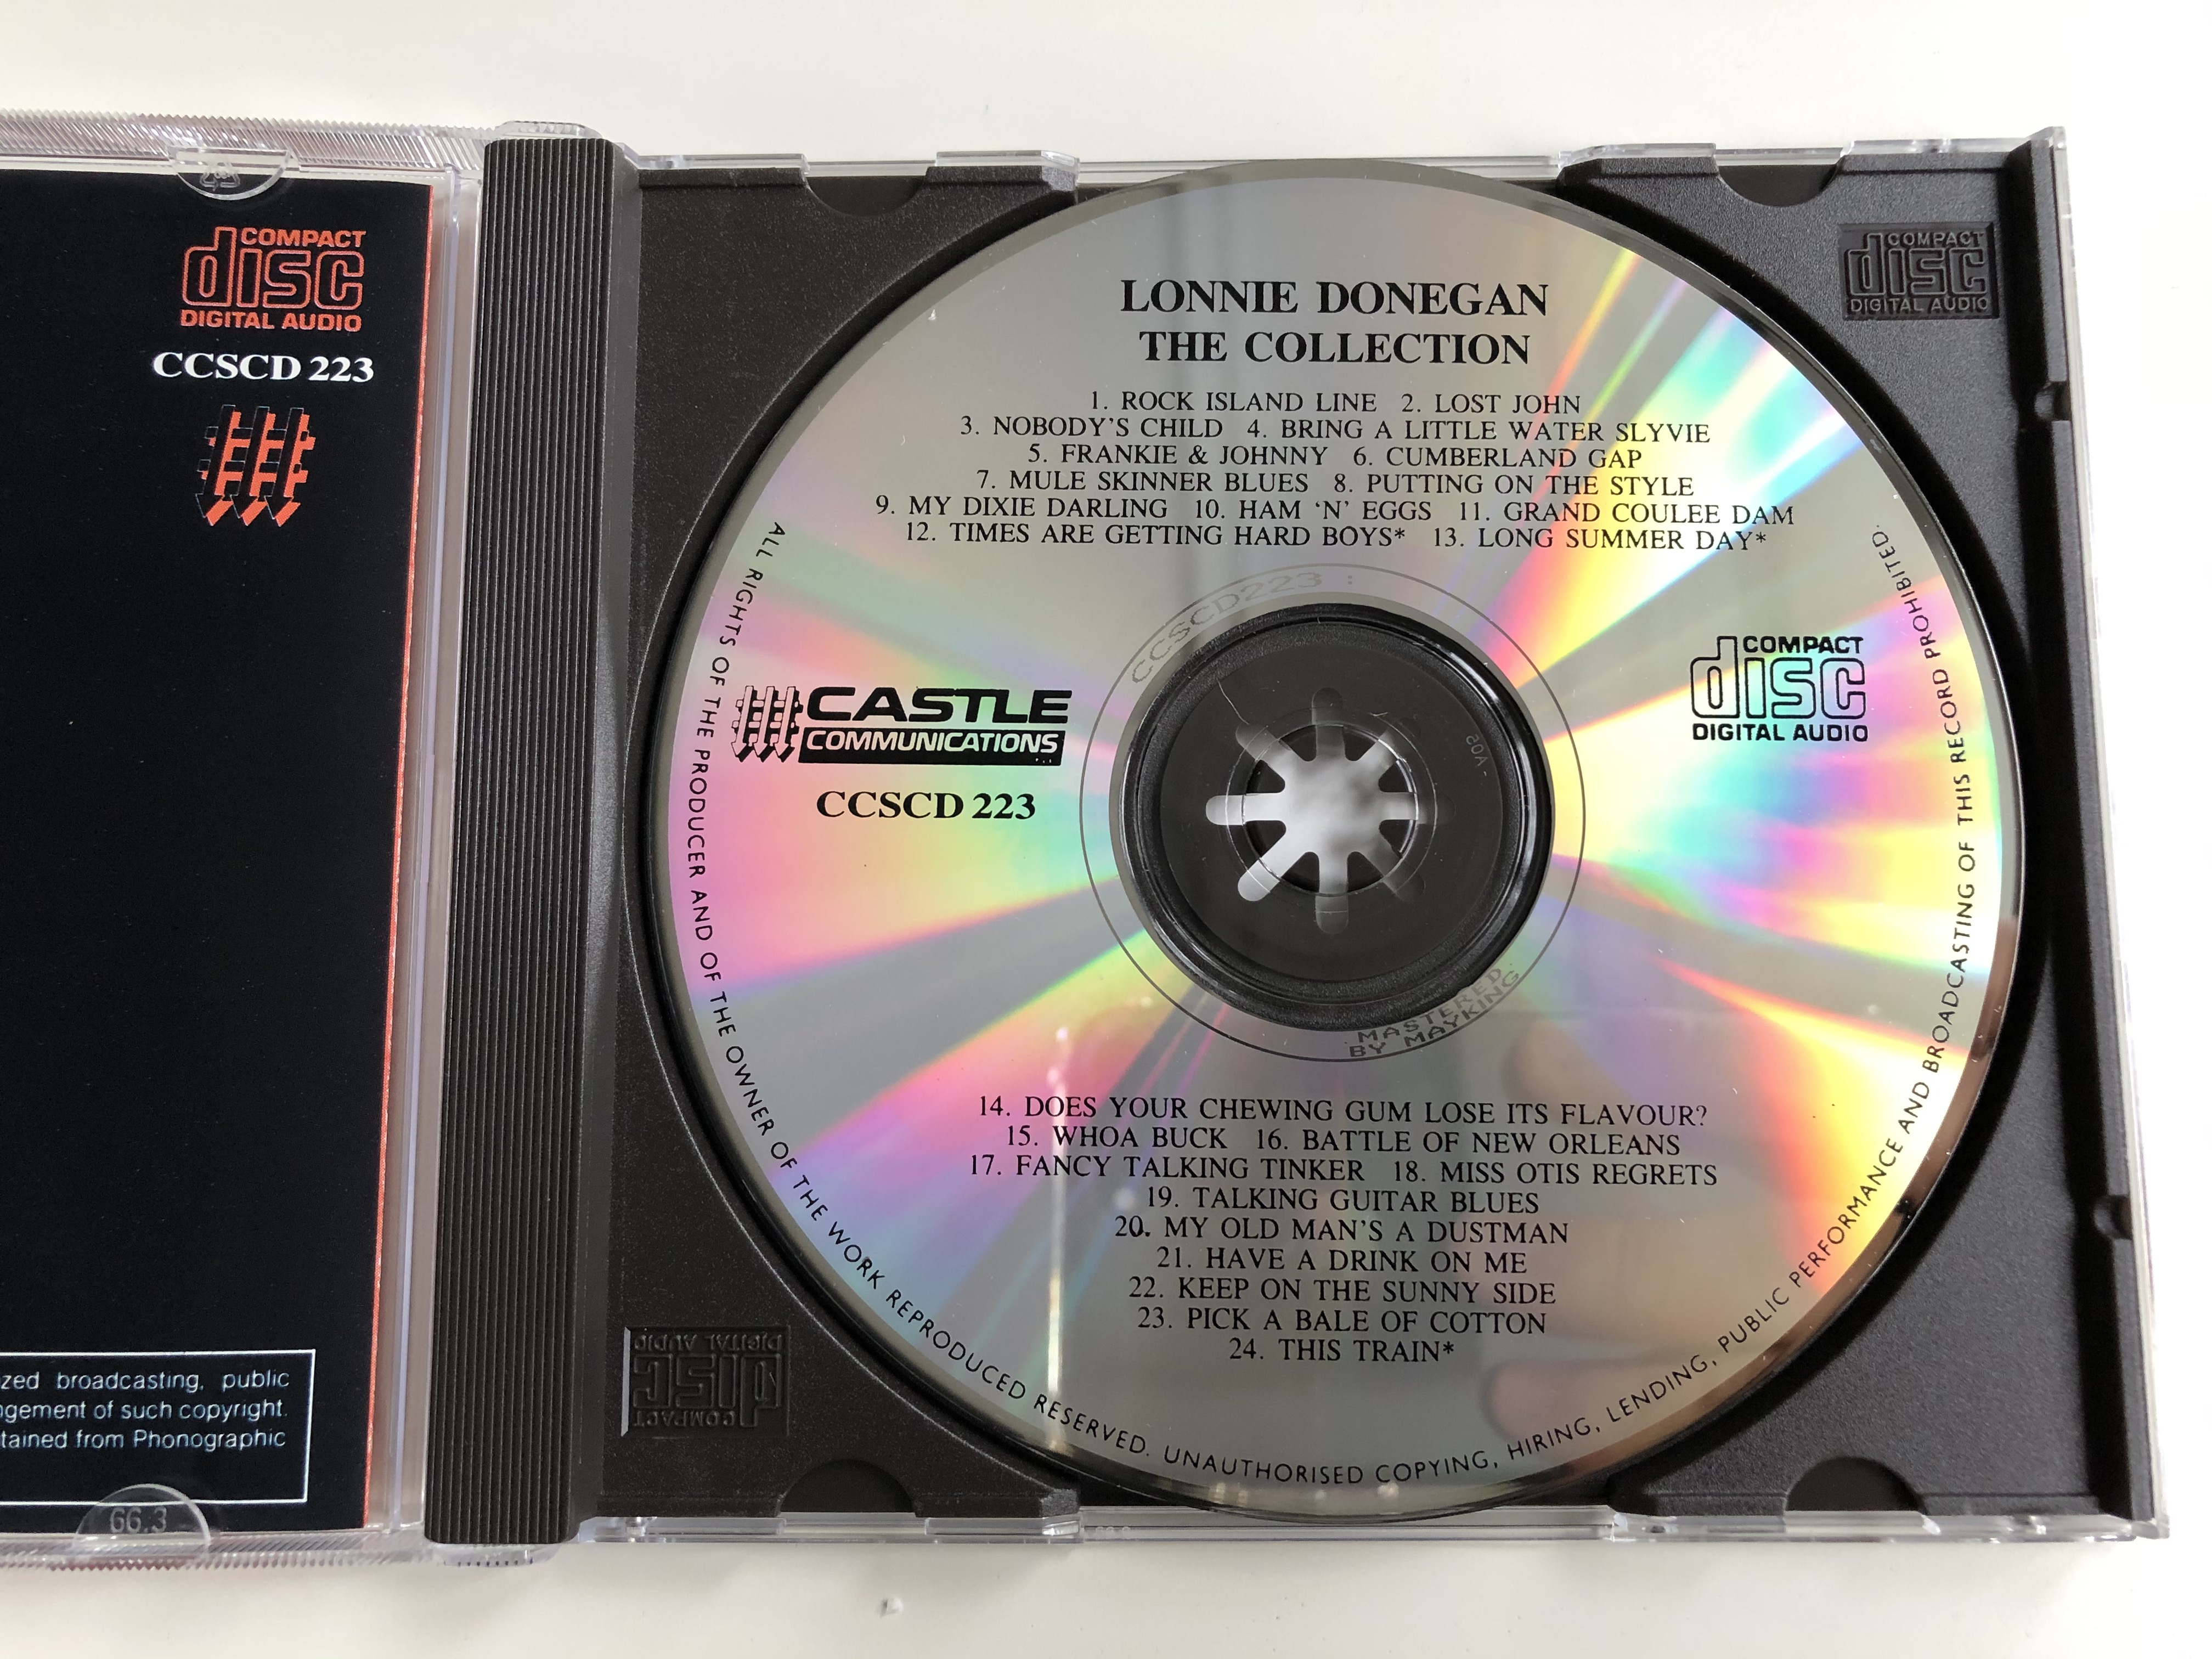 lonnie-donegan-the-collection-the-collector-series-castle-communications-audio-cd-1989-ccscd-223-3-.jpg